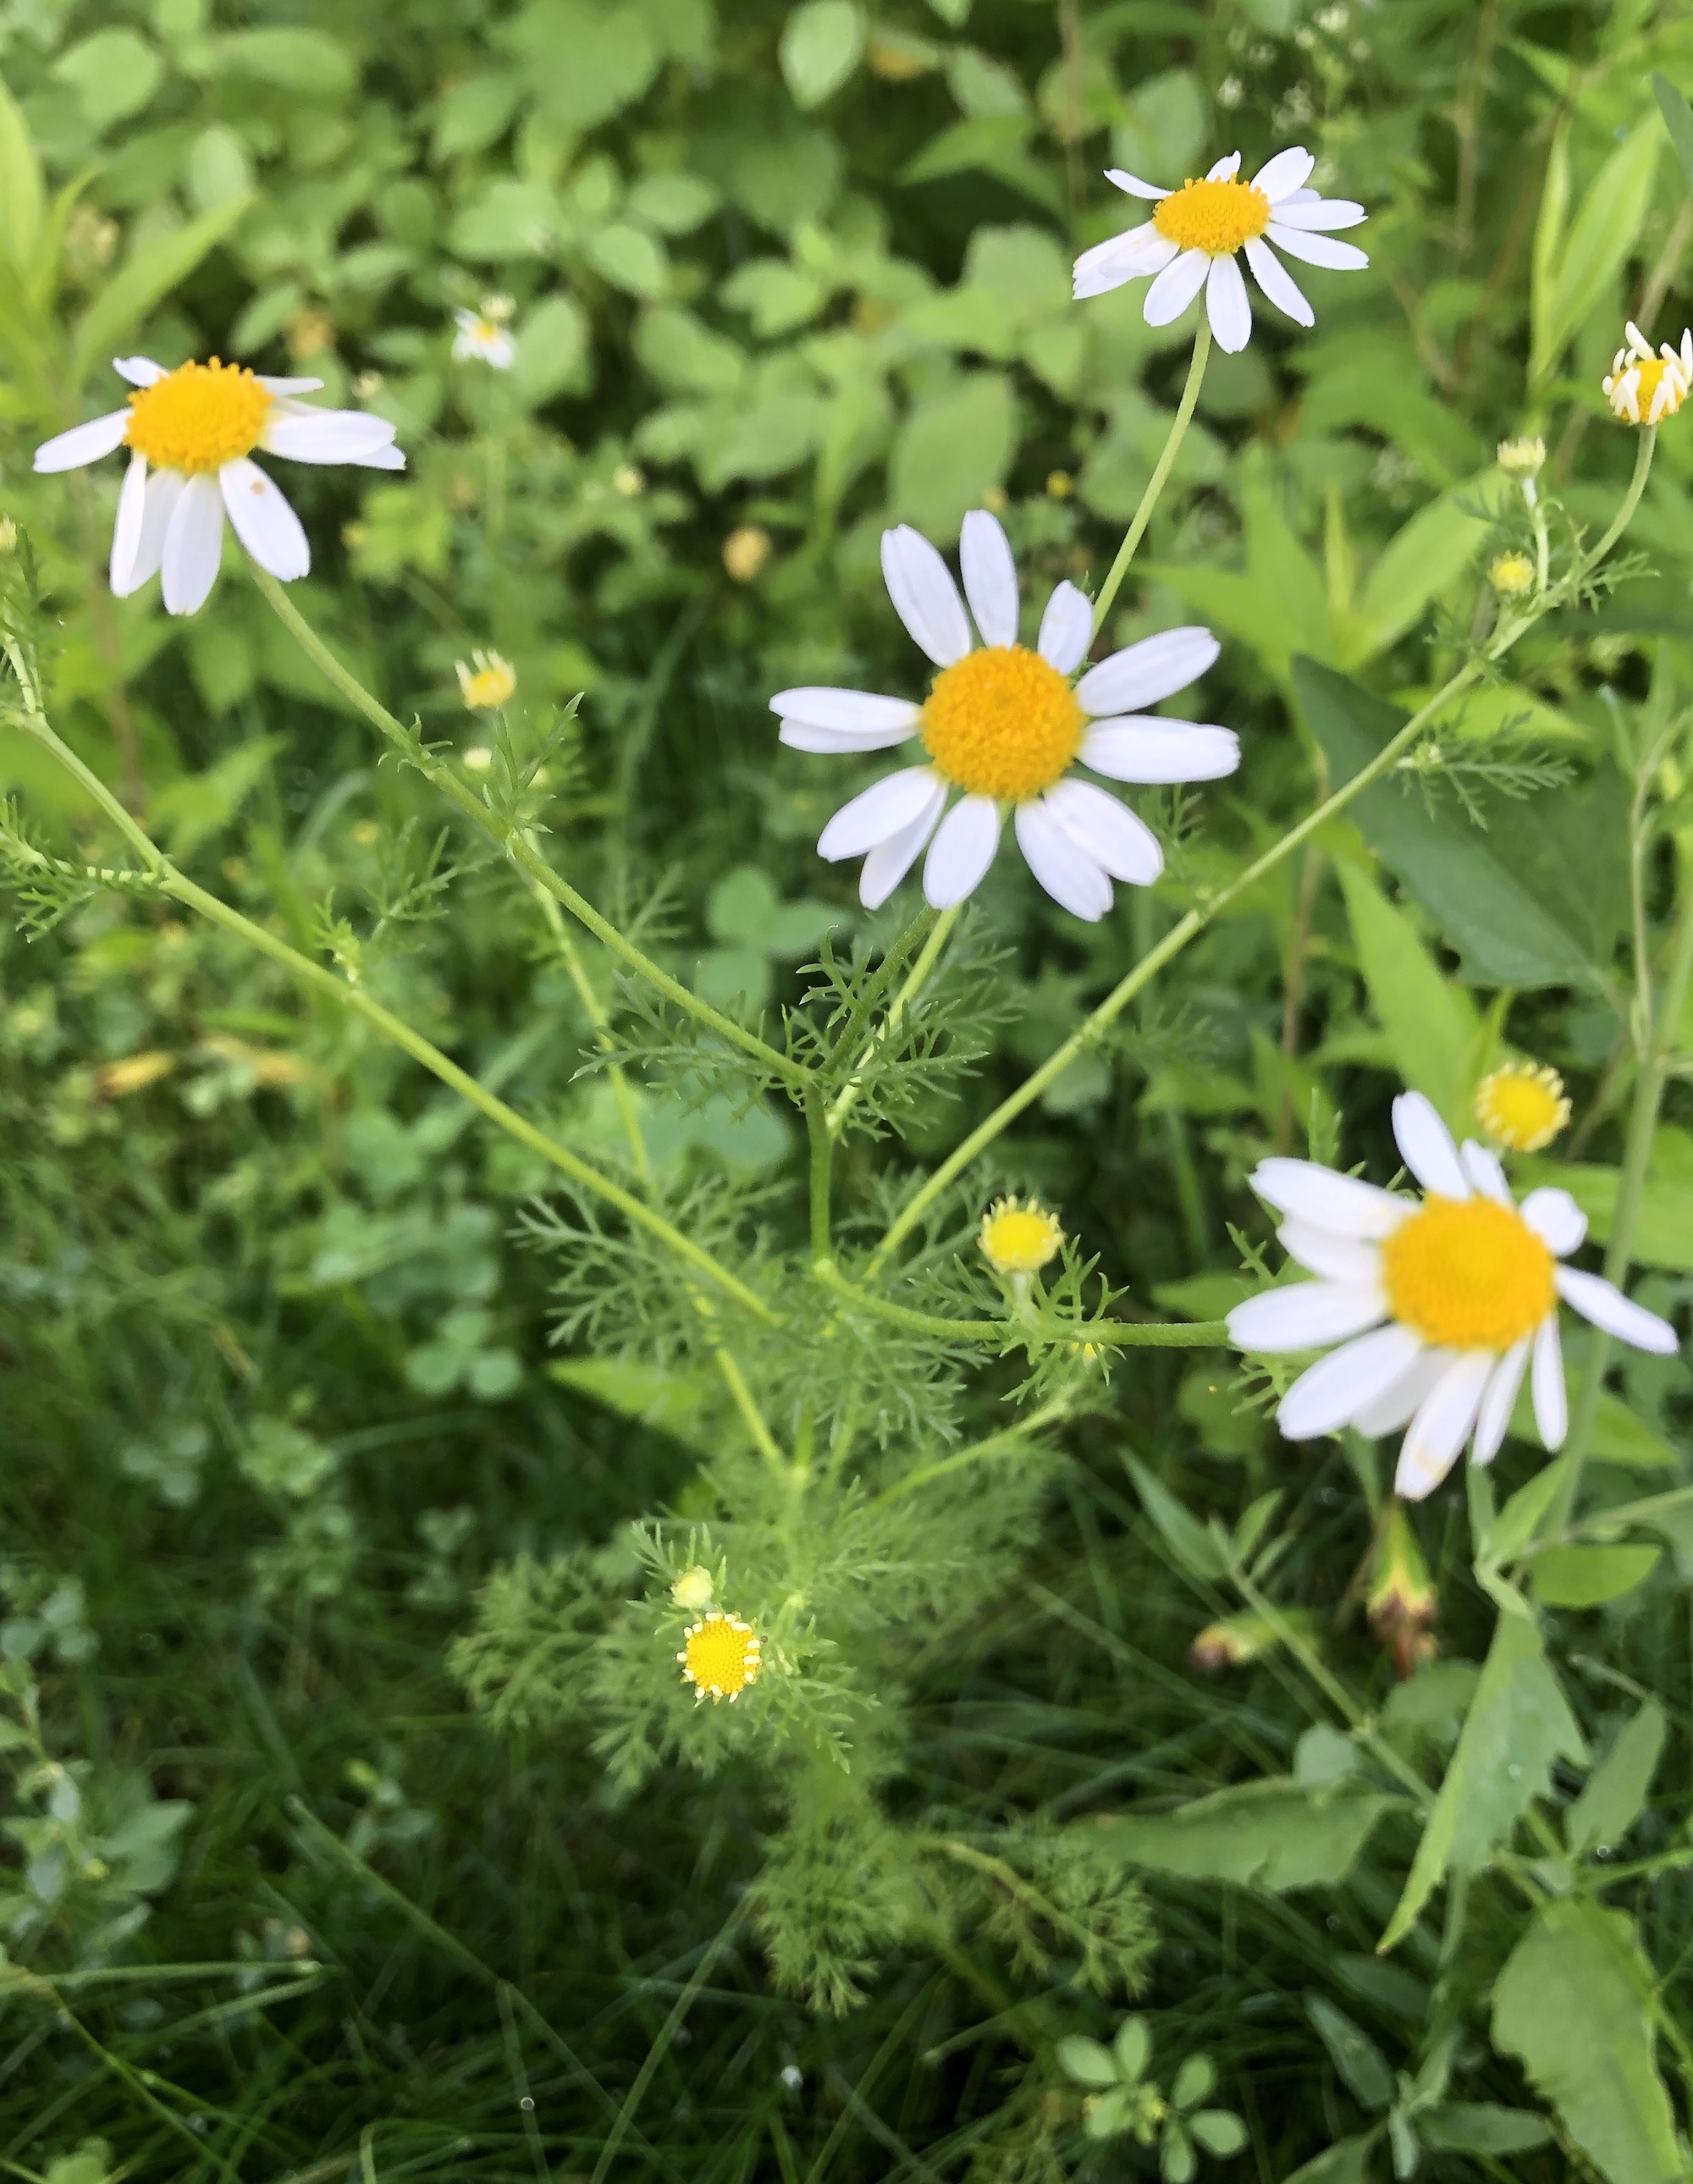 Chamomile at edge of woods on Arbor Drive in Madison, Wisconsin on August 22, 2019.